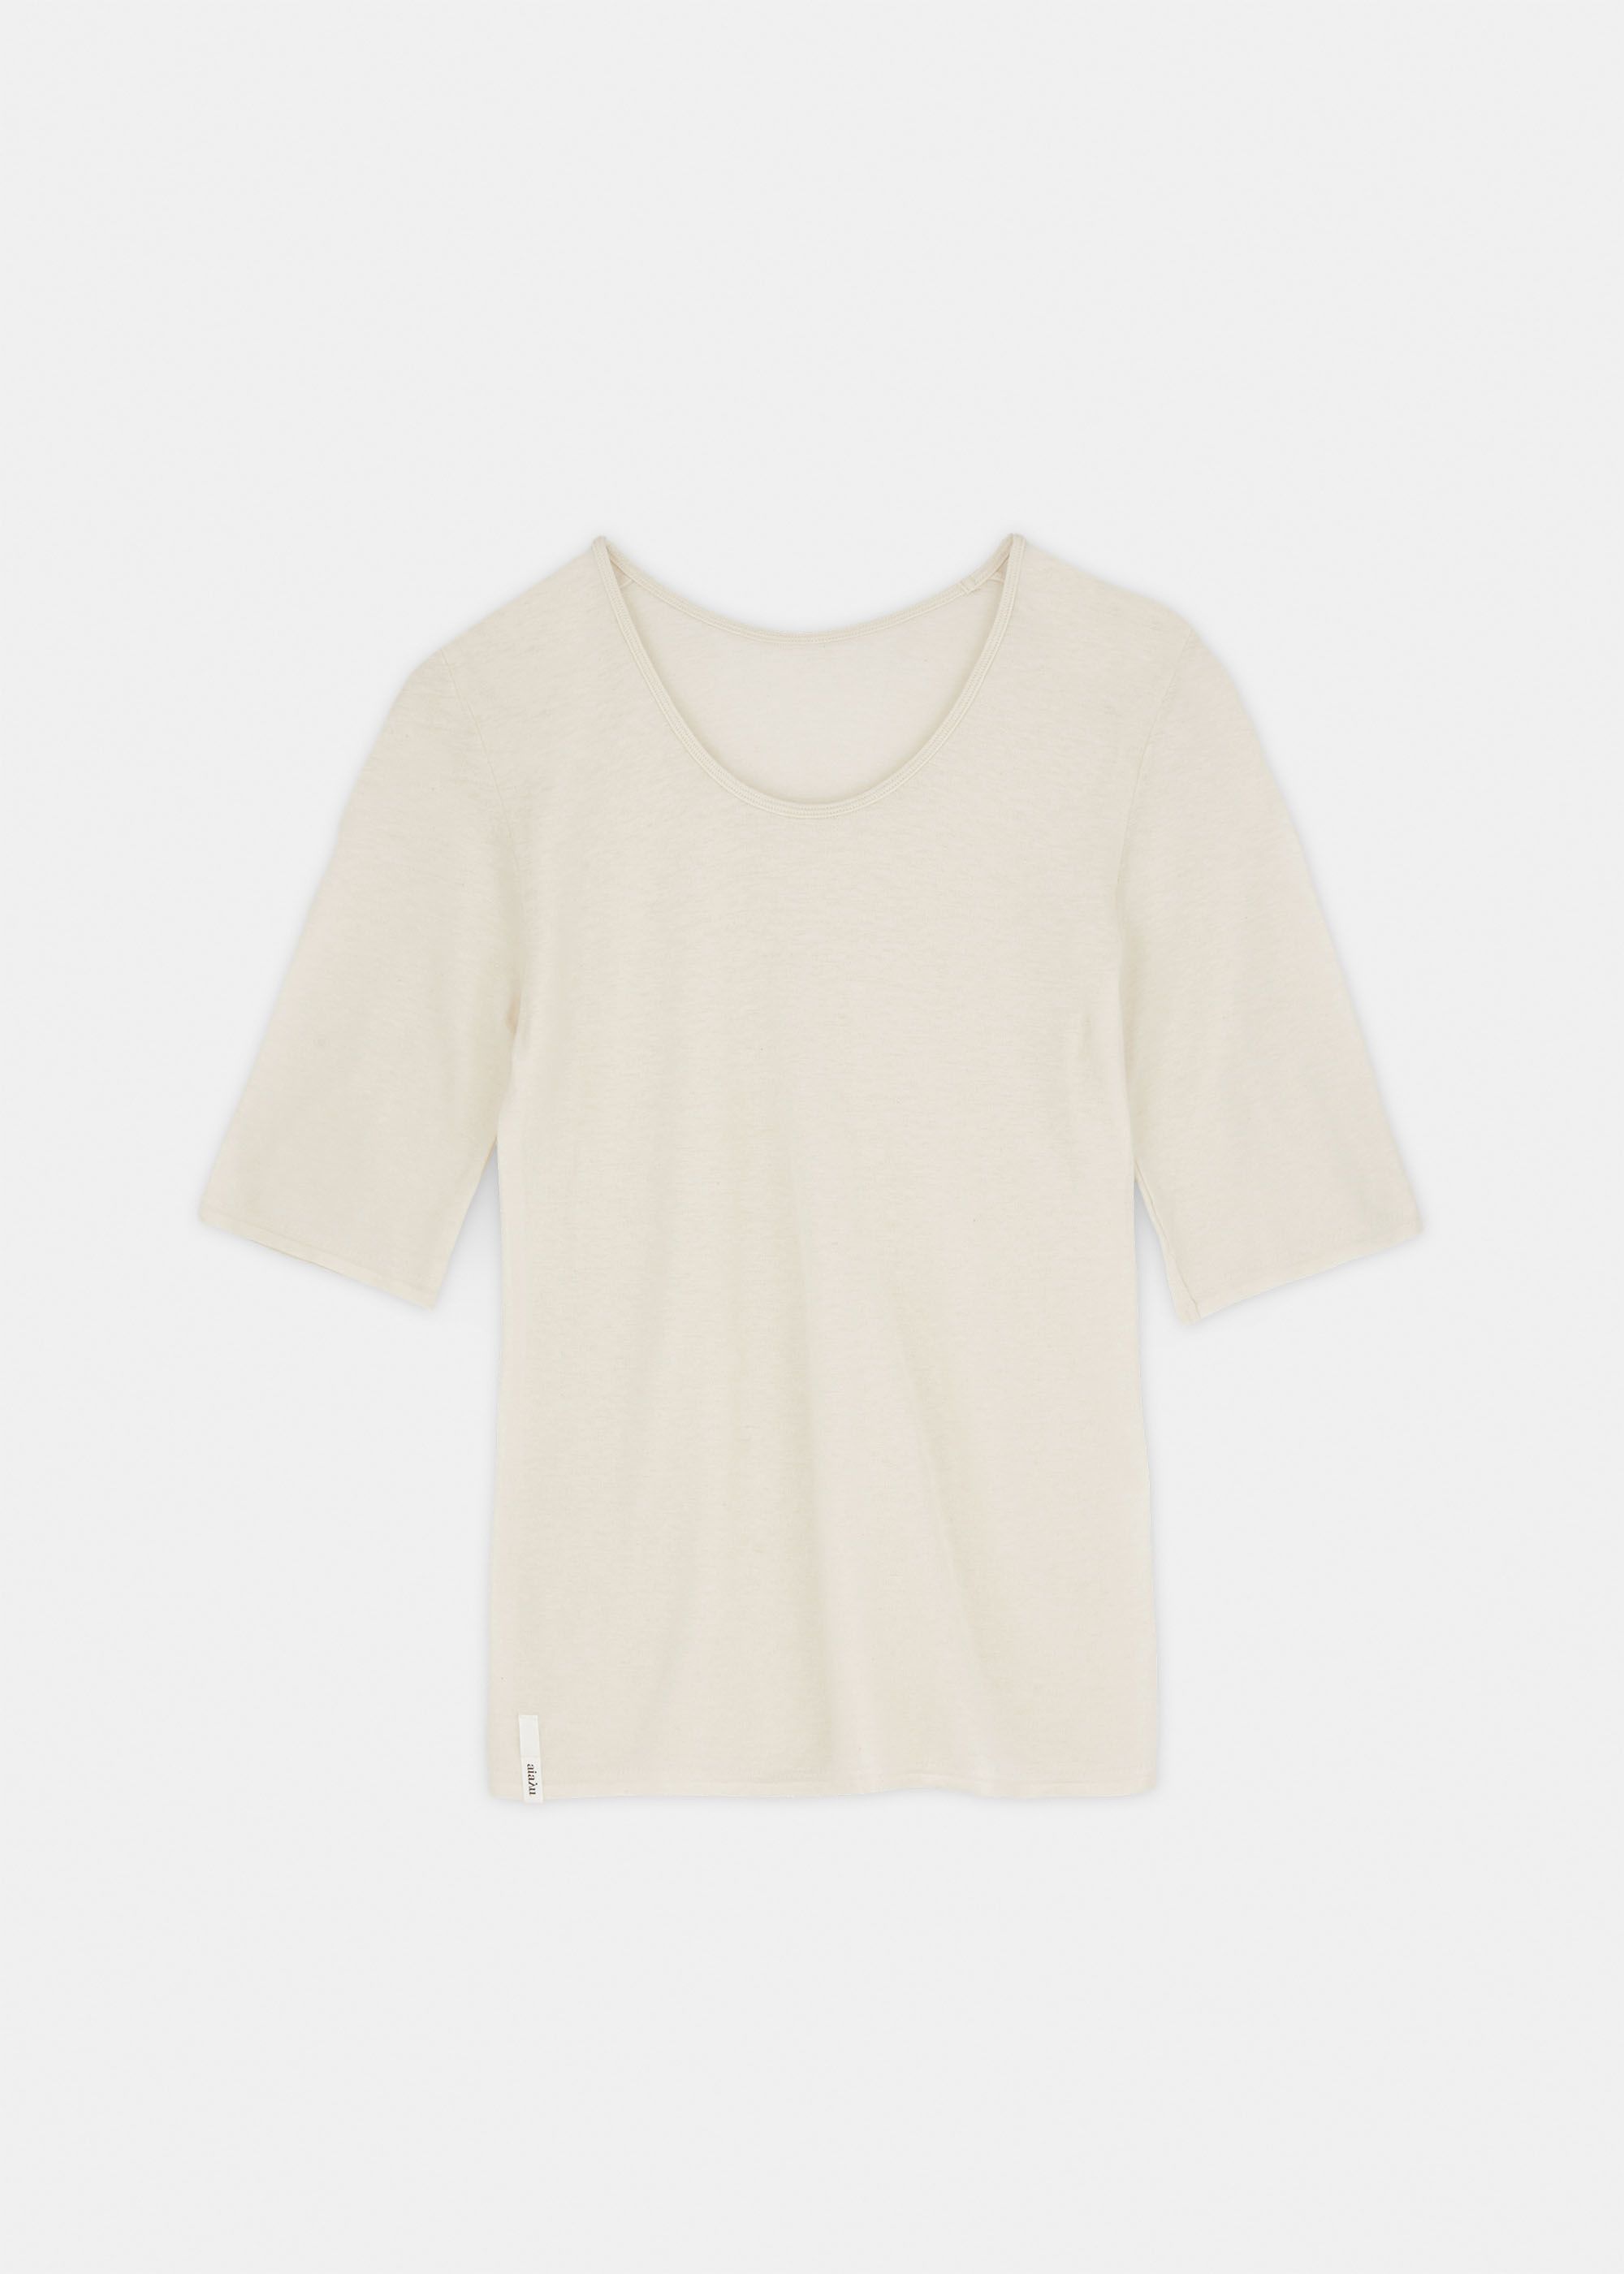 t-shirts - Gentle cashmere tee